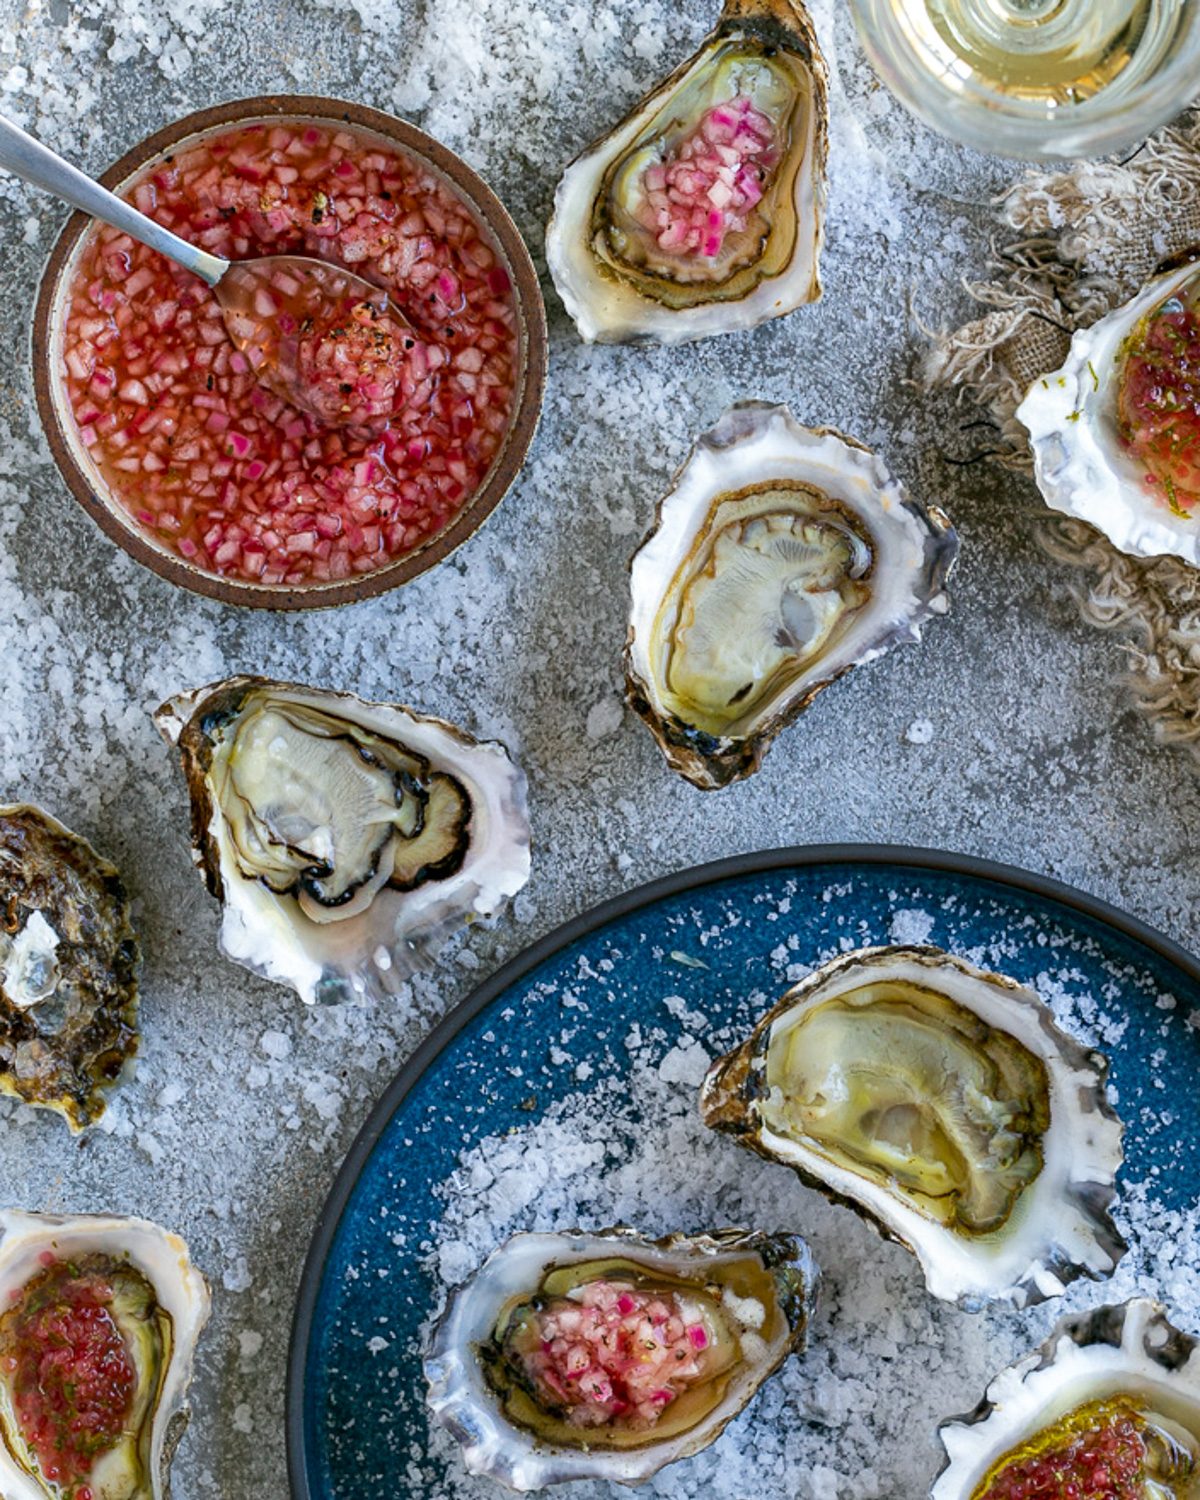 Serving mignonette with oysters